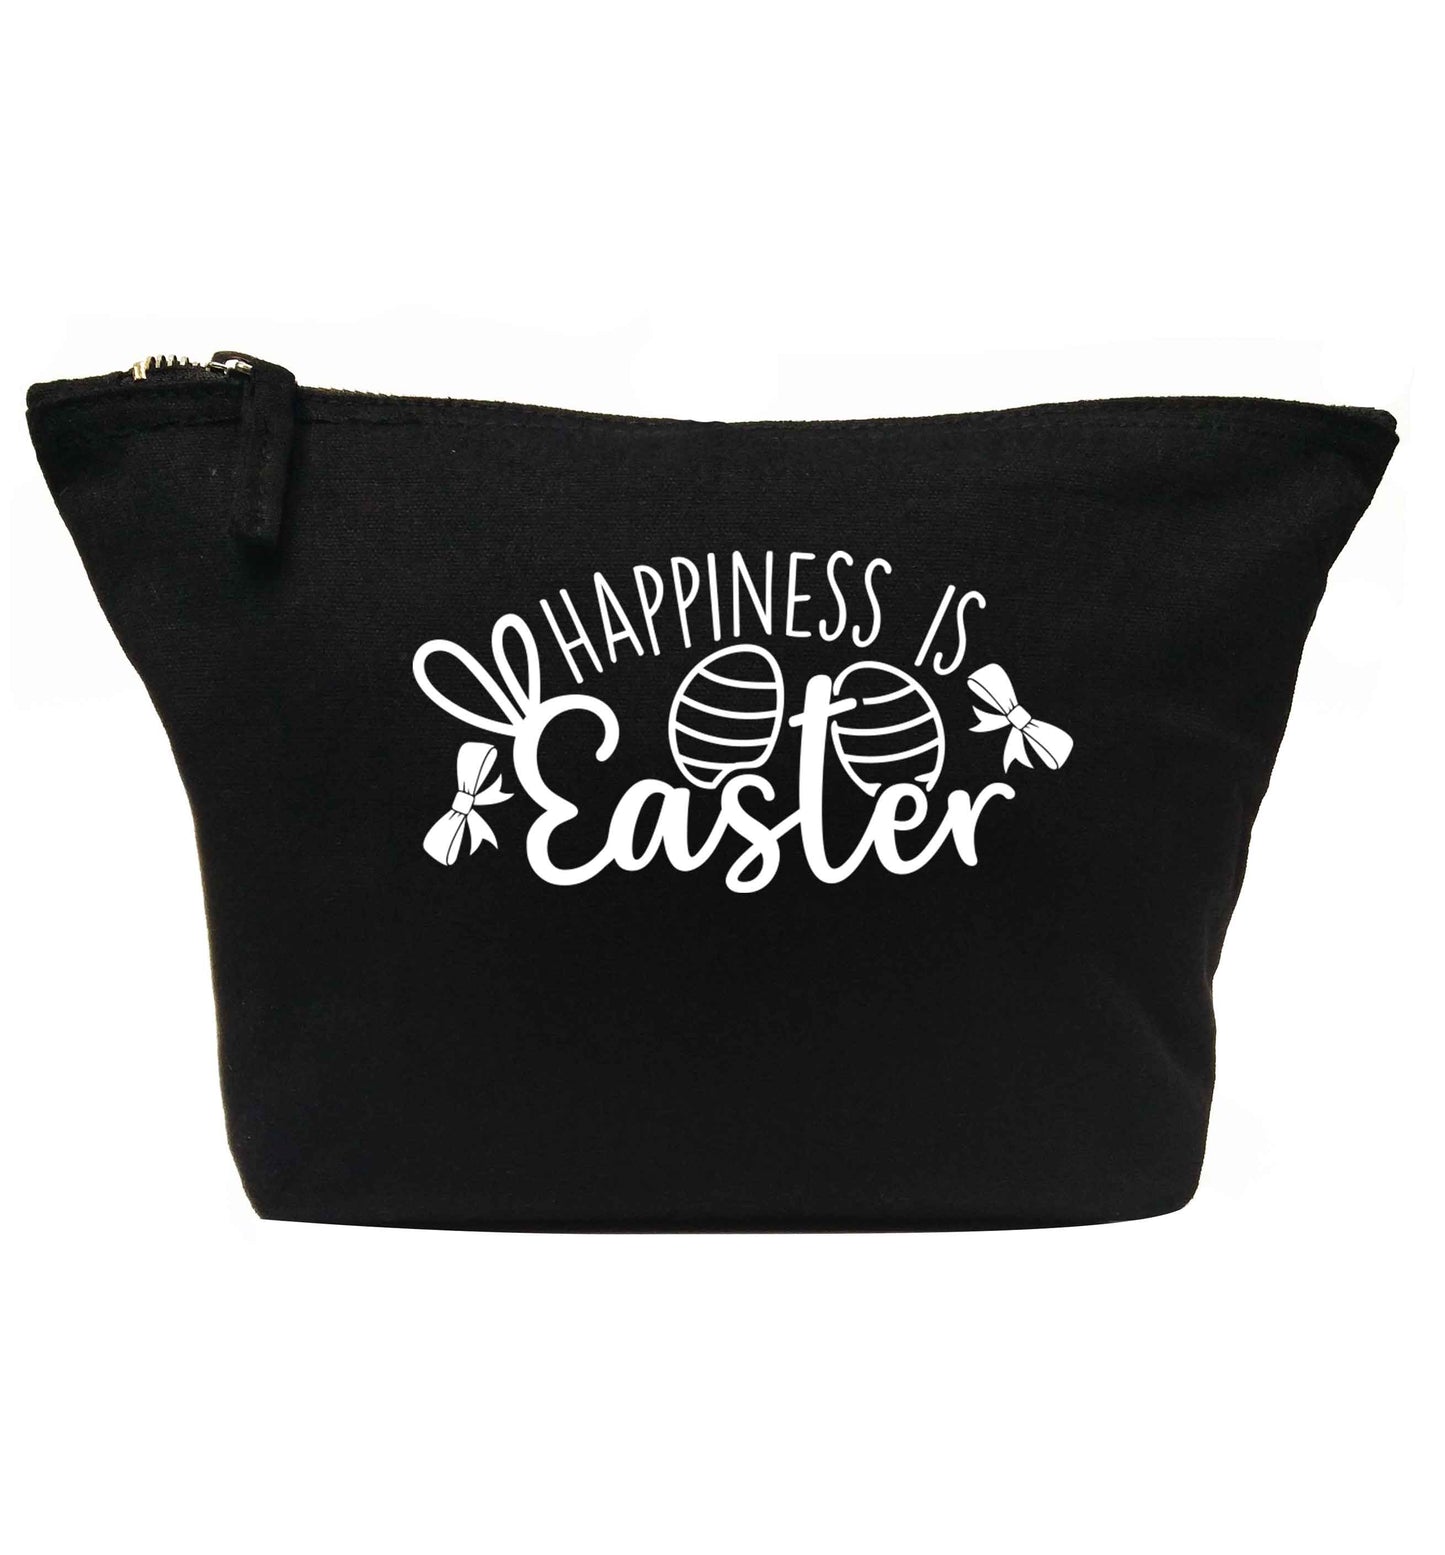 Happiness is easter | Makeup / wash bag